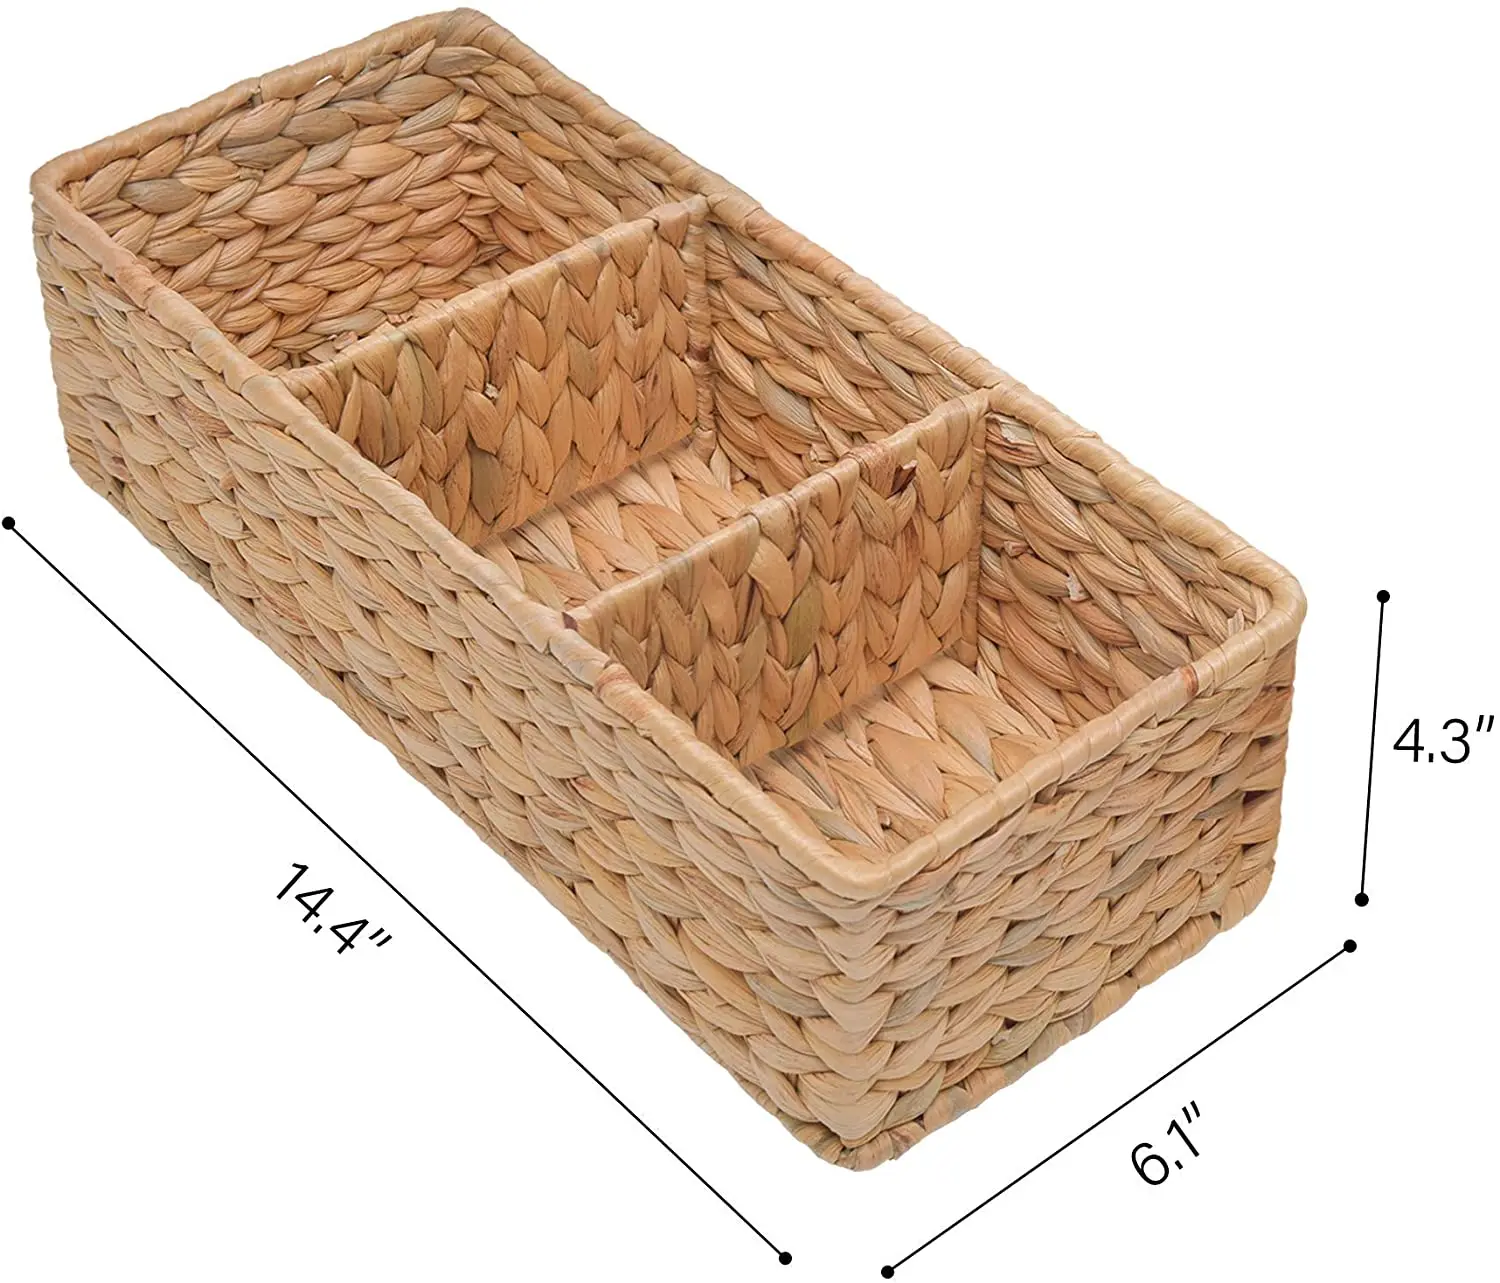 Sale 3 Section Water Hyacinth Storage Basket, Set of 2 Decorative Wicker Baskets For Bathroom and Toilet Paper Basket